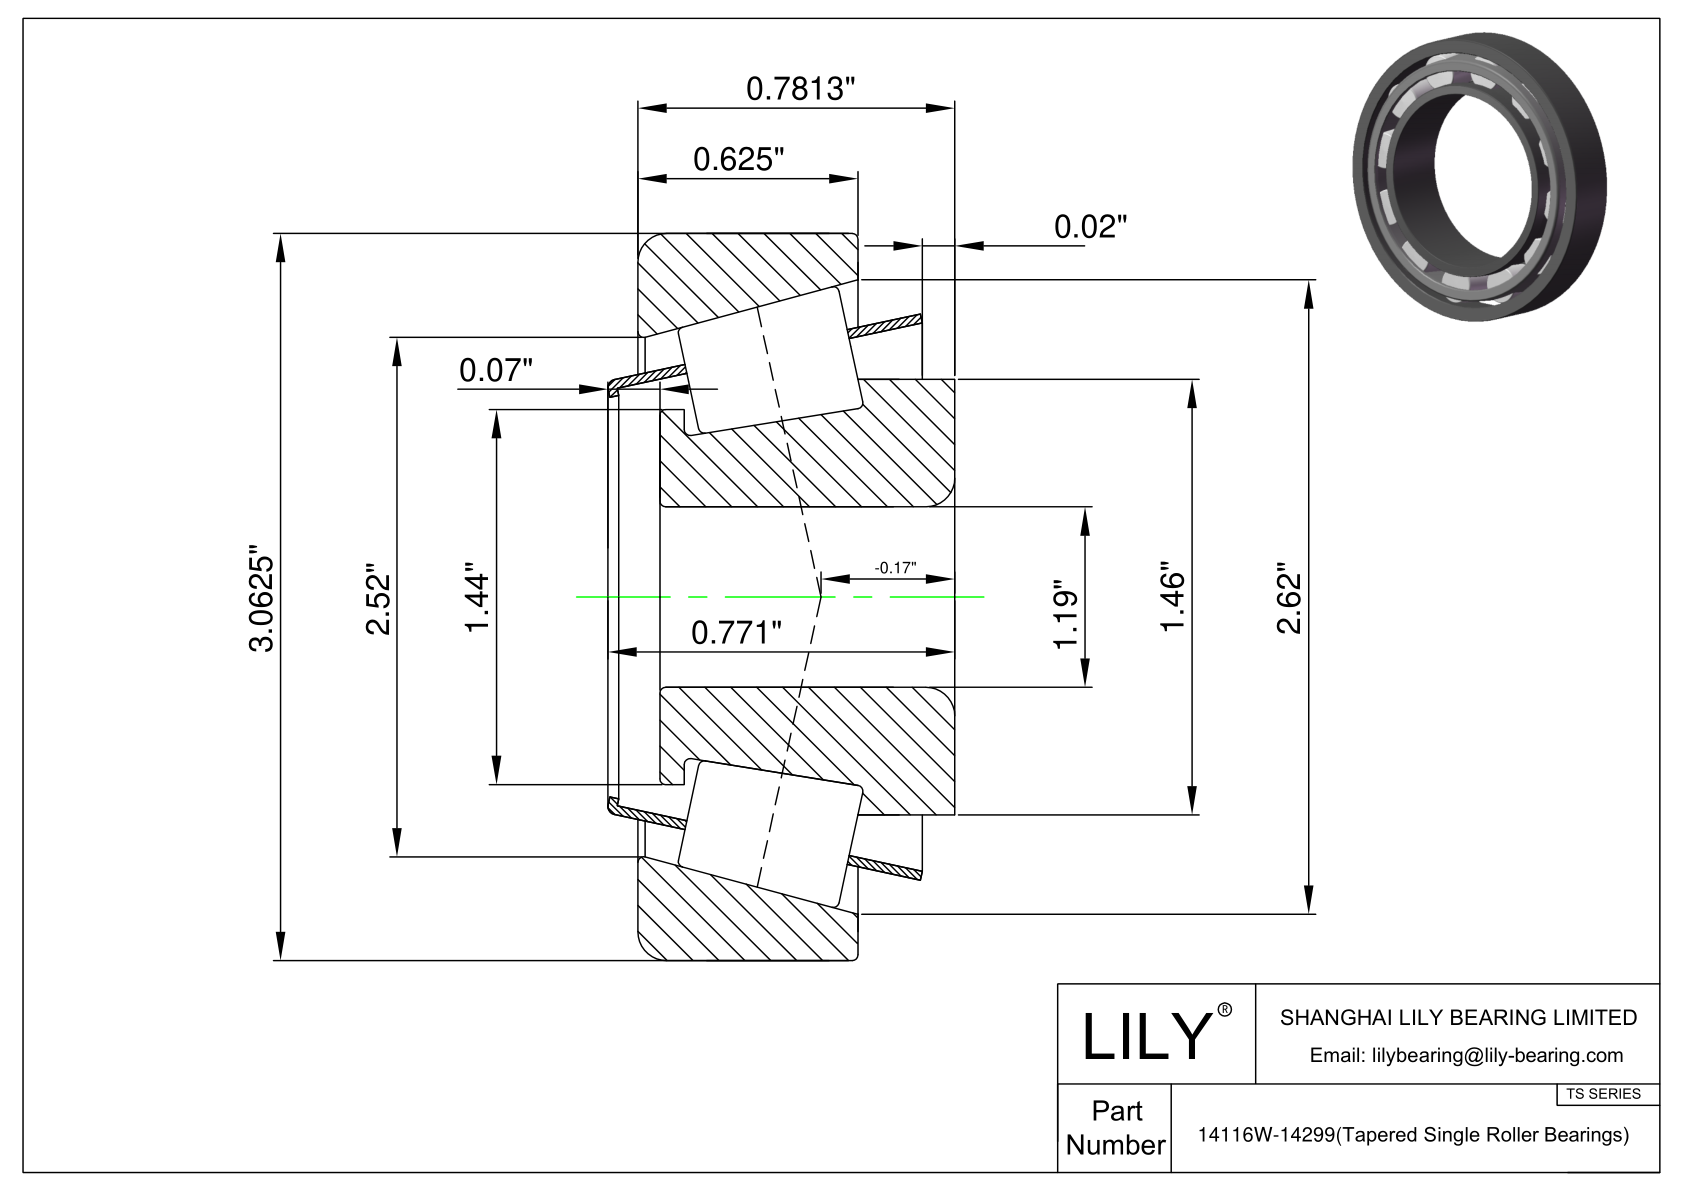 14116W-14299 TS (Tapered Single Roller Bearings) (Imperial) cad drawing